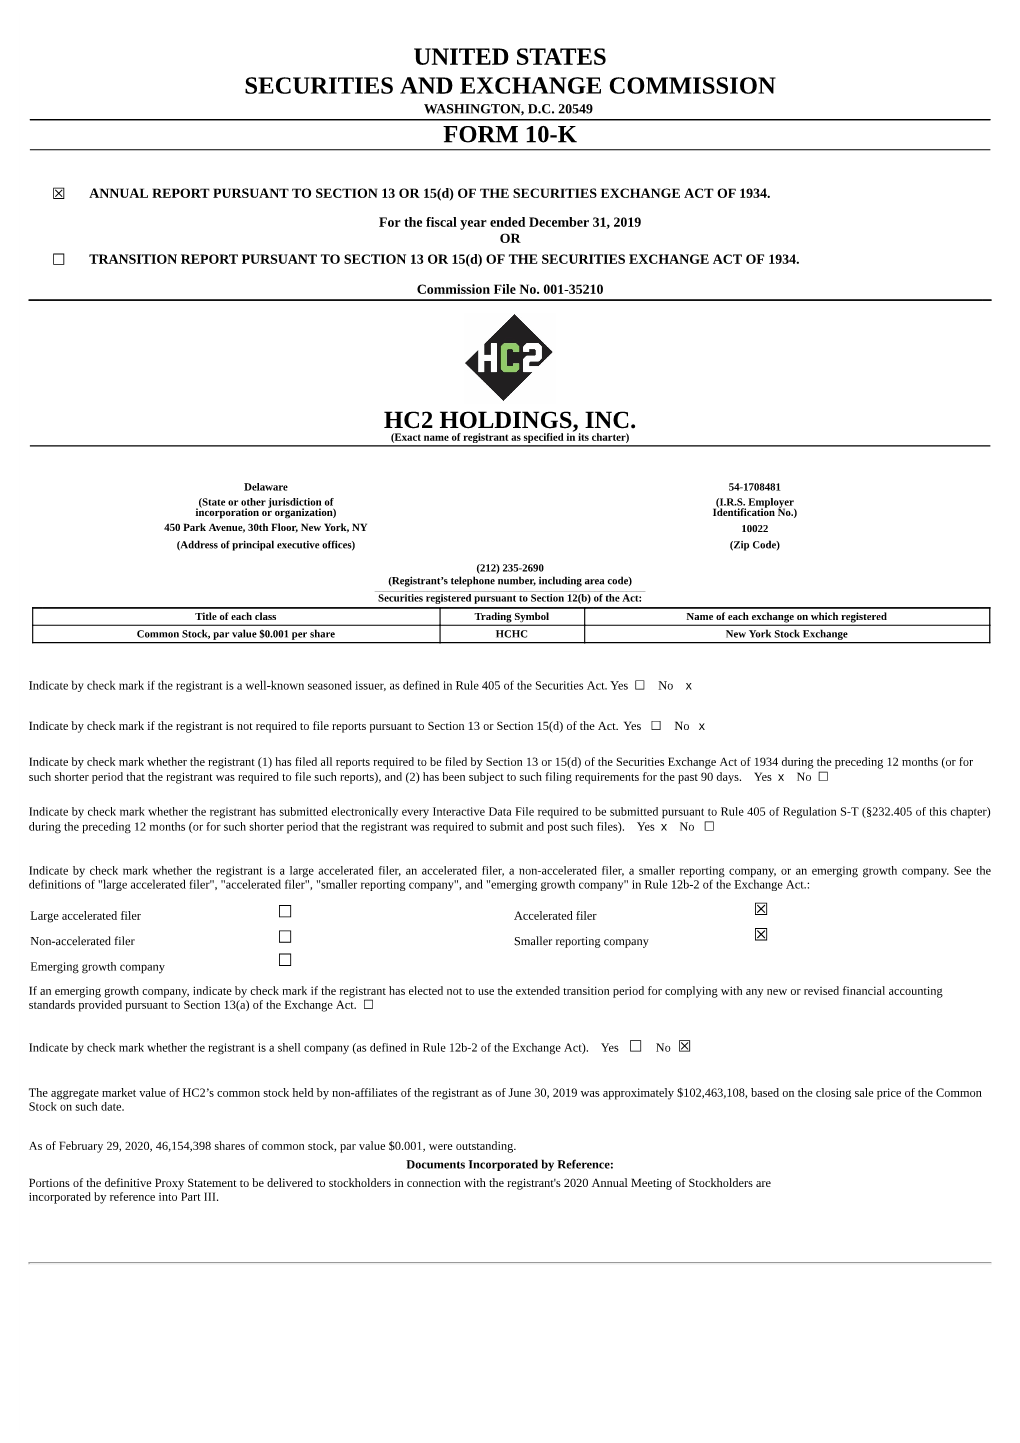 United States Securities and Exchange Commission Form 10-K Hc2 Holdings, Inc